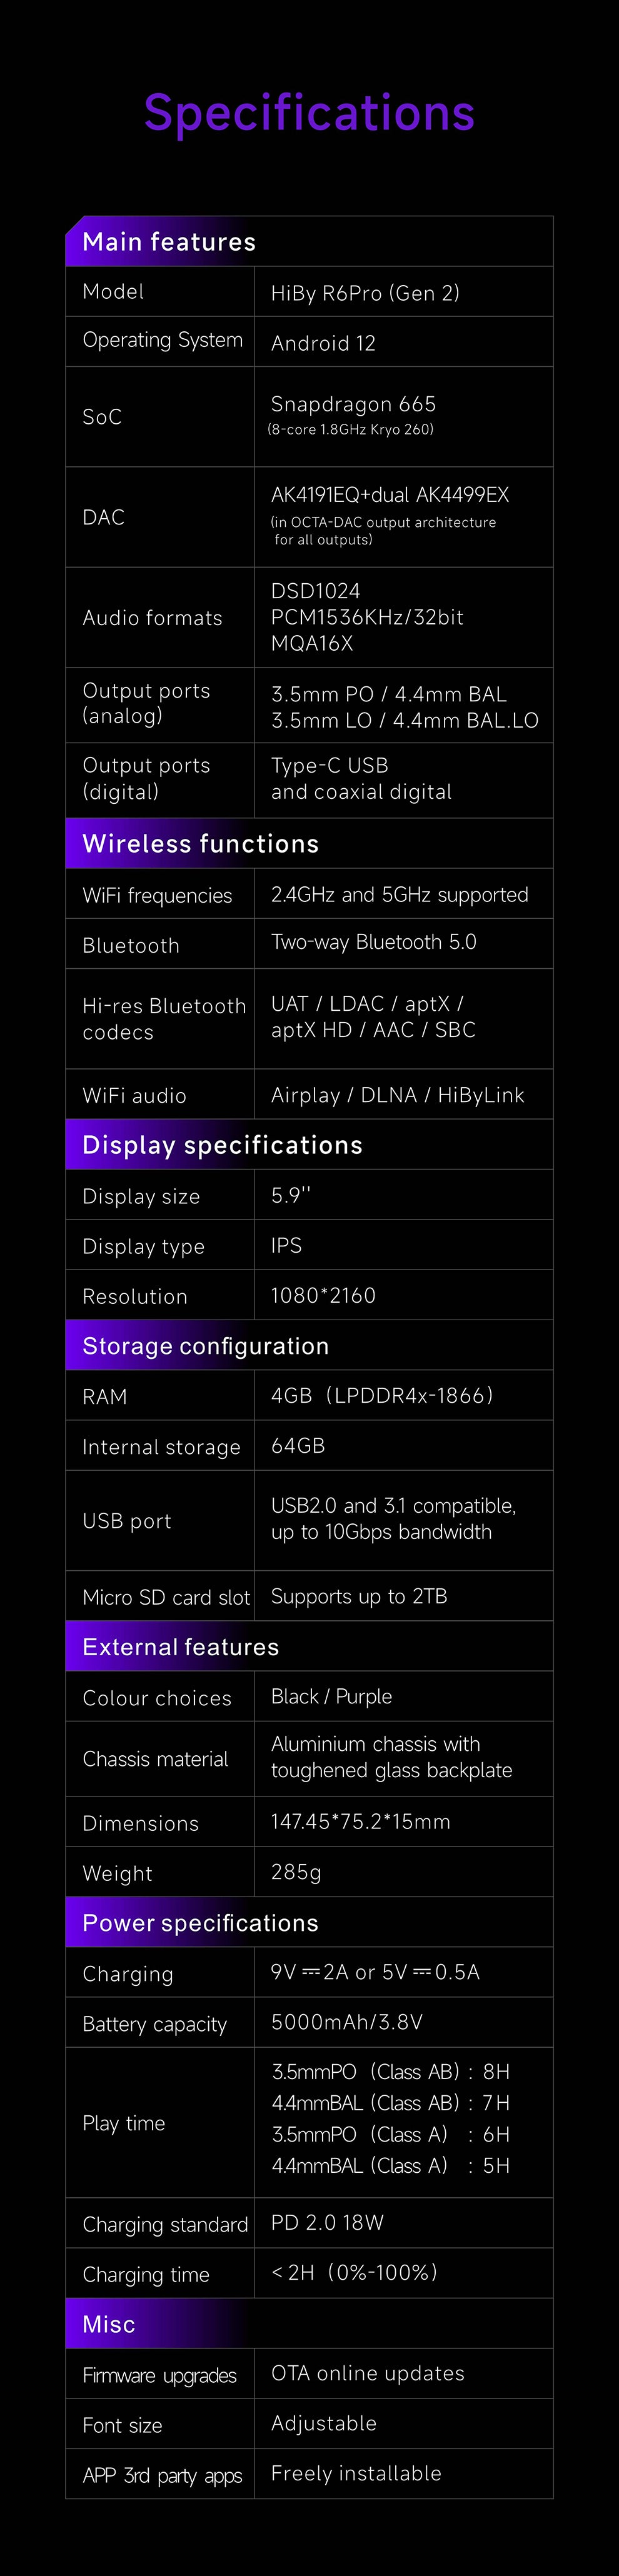 HiBy R6 Pro II Technical Specifications